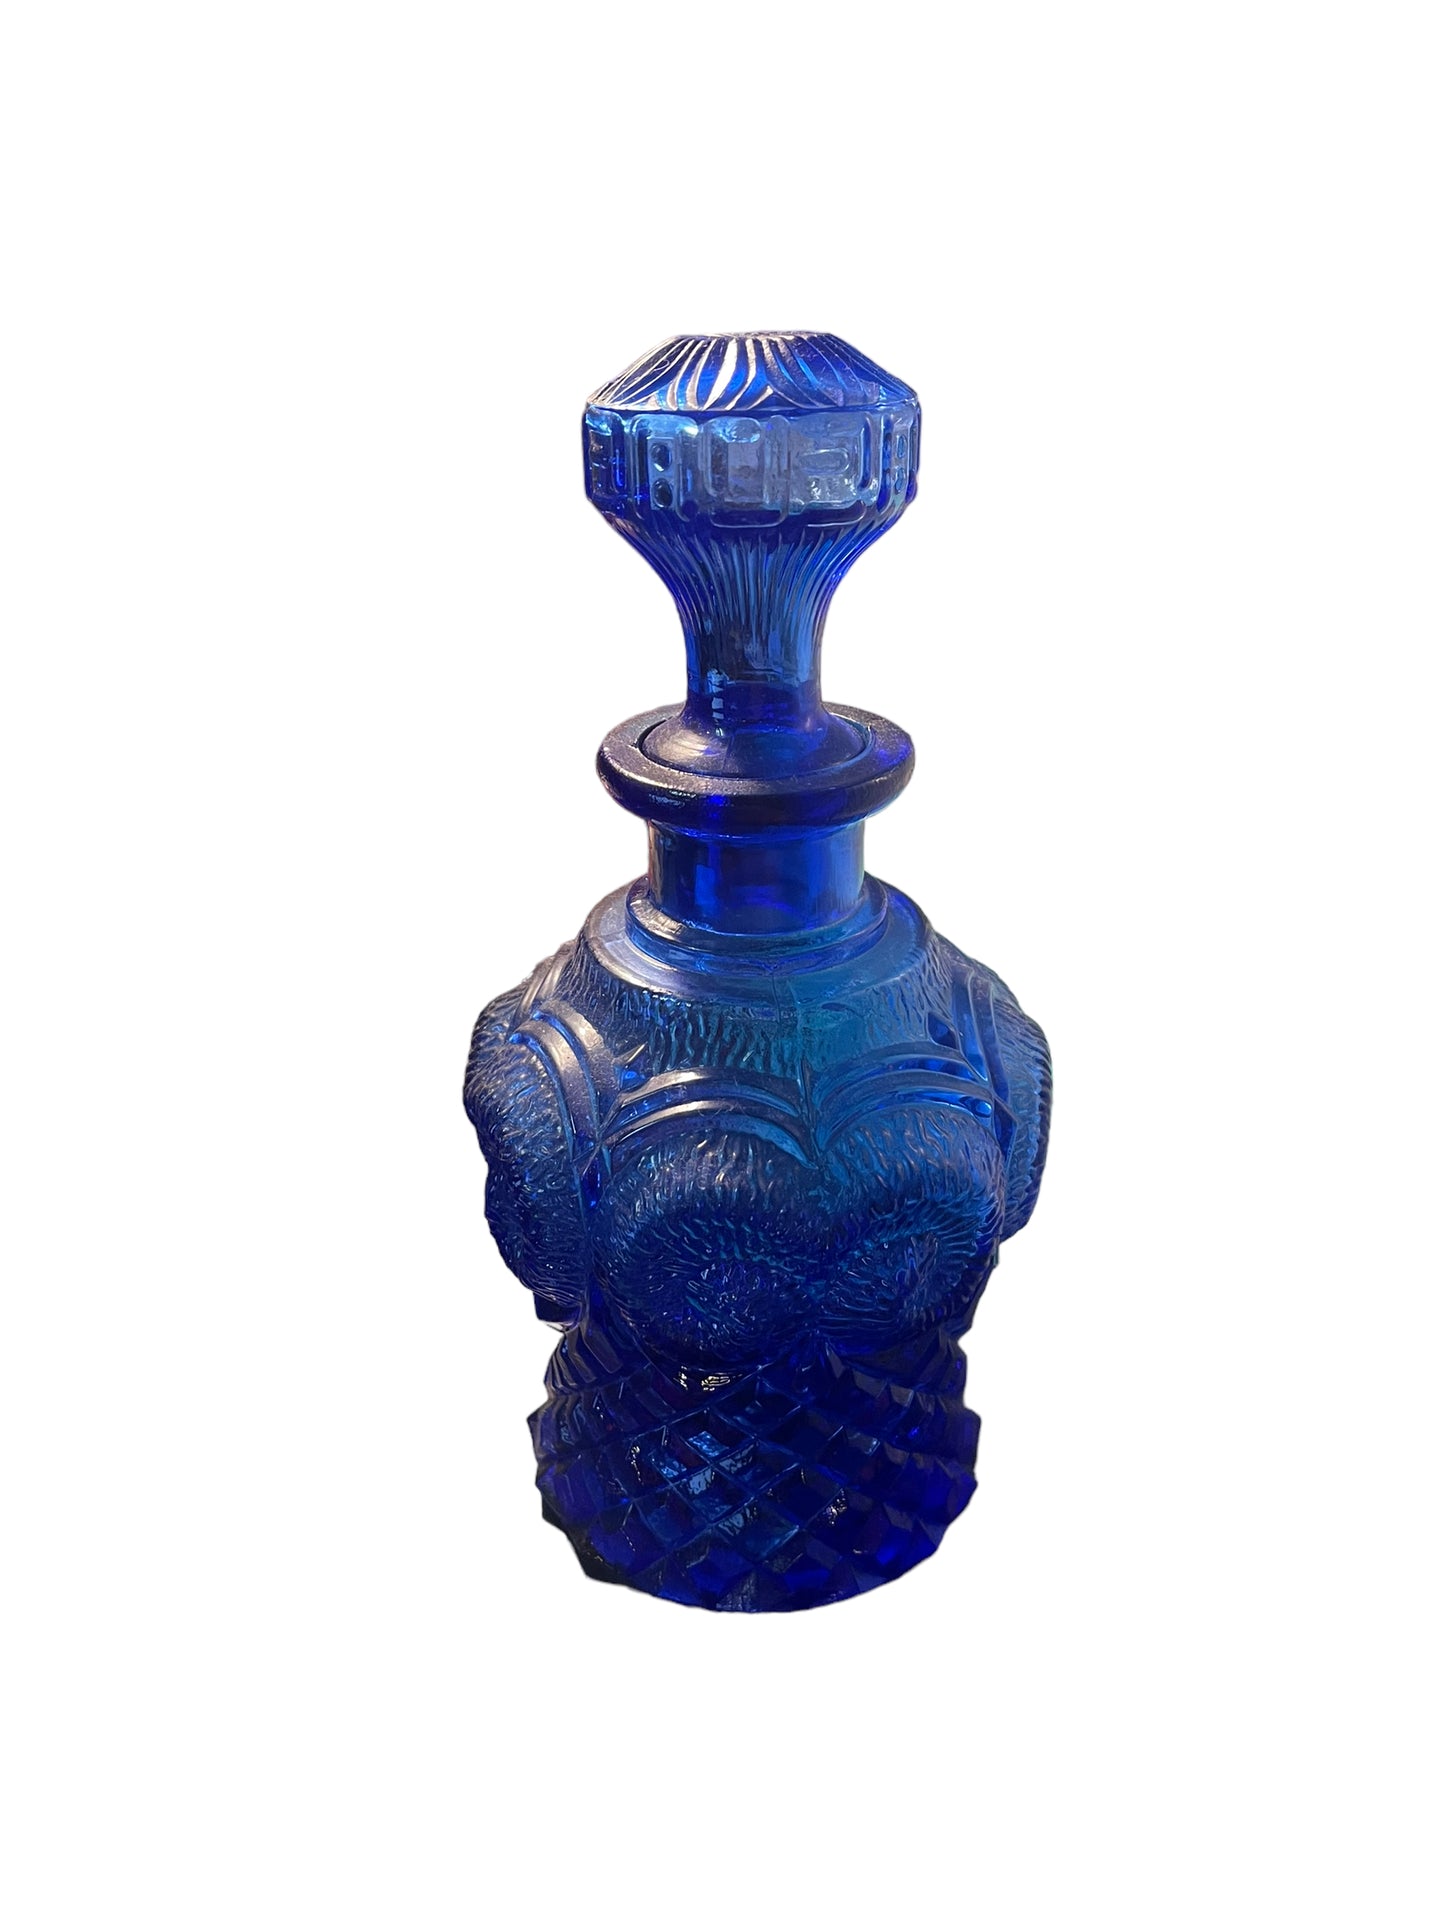 Vintage Cobalt Glass Decanter #2 in Very Rich Beautiful Blue